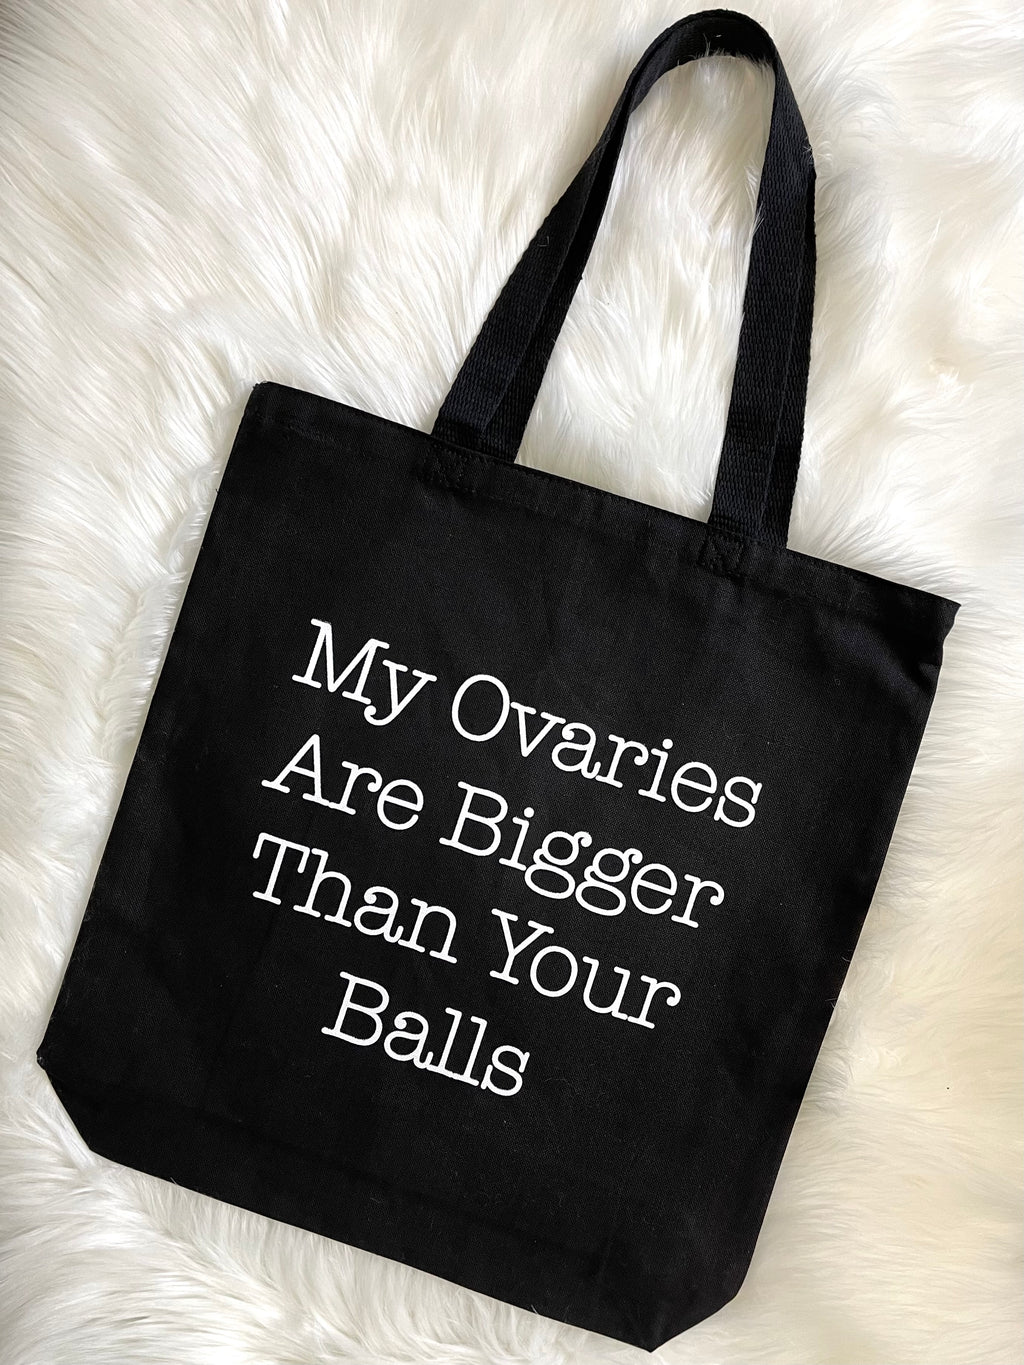 My Ovaries Are Bigger Than Your Balls Tote